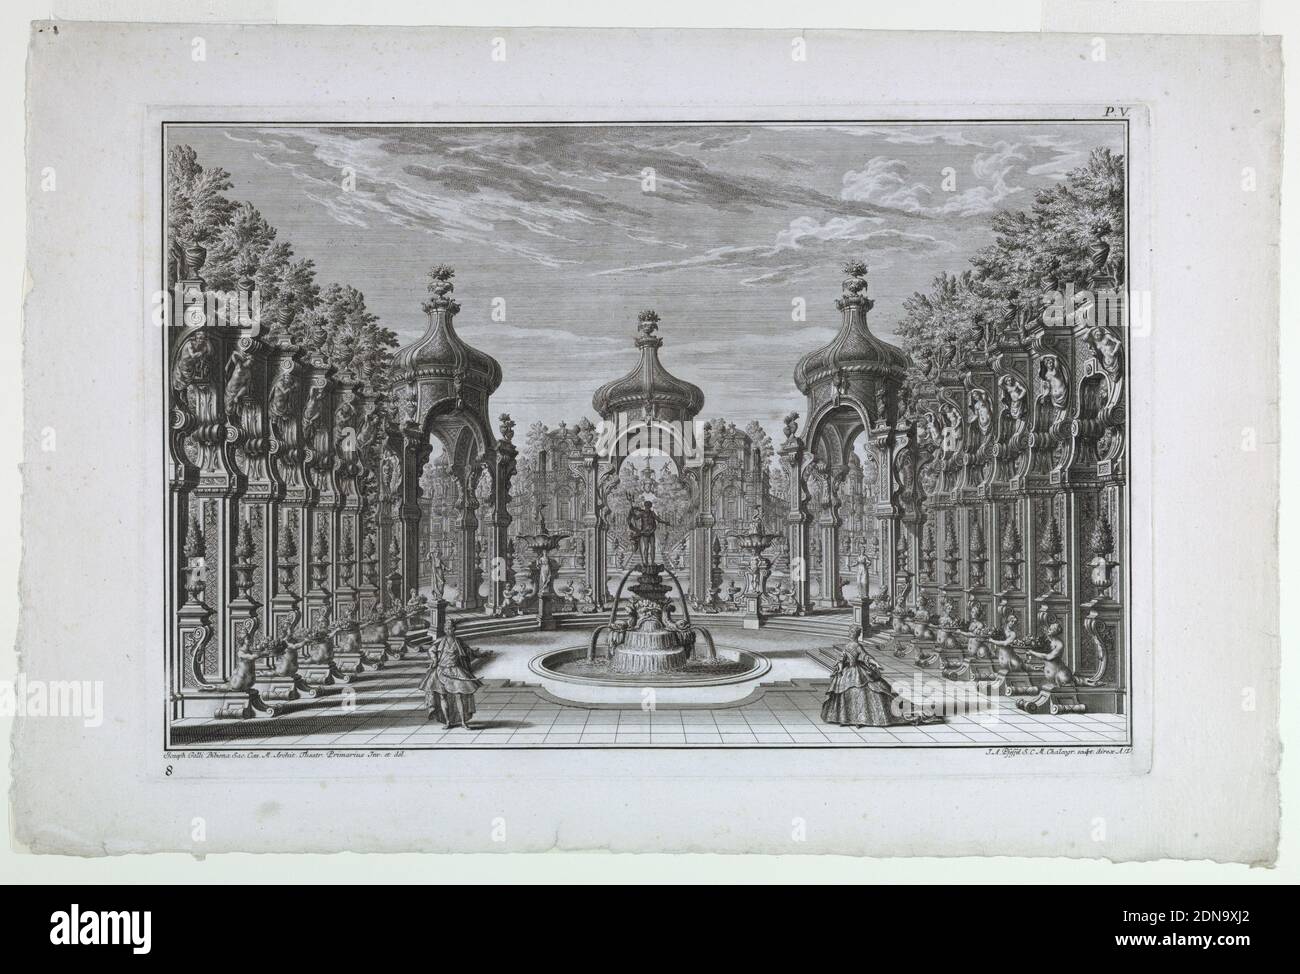 Stage Design: Garden Scene with Fountain, plate 8, part 5, from 'Architetture e Prospettive dedicate alla Maestà di Carlo Sesto', Johann Andréas Pfeffel, German, 1674–1748, Giuseppe Galli Bibiena, Italian, 1696–1756, Etching with engraving on white laid paper, Stage design with a fountain surmounted by figure of Neptune as centerpiece. On left and right are ornamented colonnades with statues, trees, and urns. Beyond colonnade in background is elaborate villa/palace. Male (left) and female (right) figures occupy the foreground in front of the fountain., Augsburg, Germany, 1740–44, theater Stock Photo